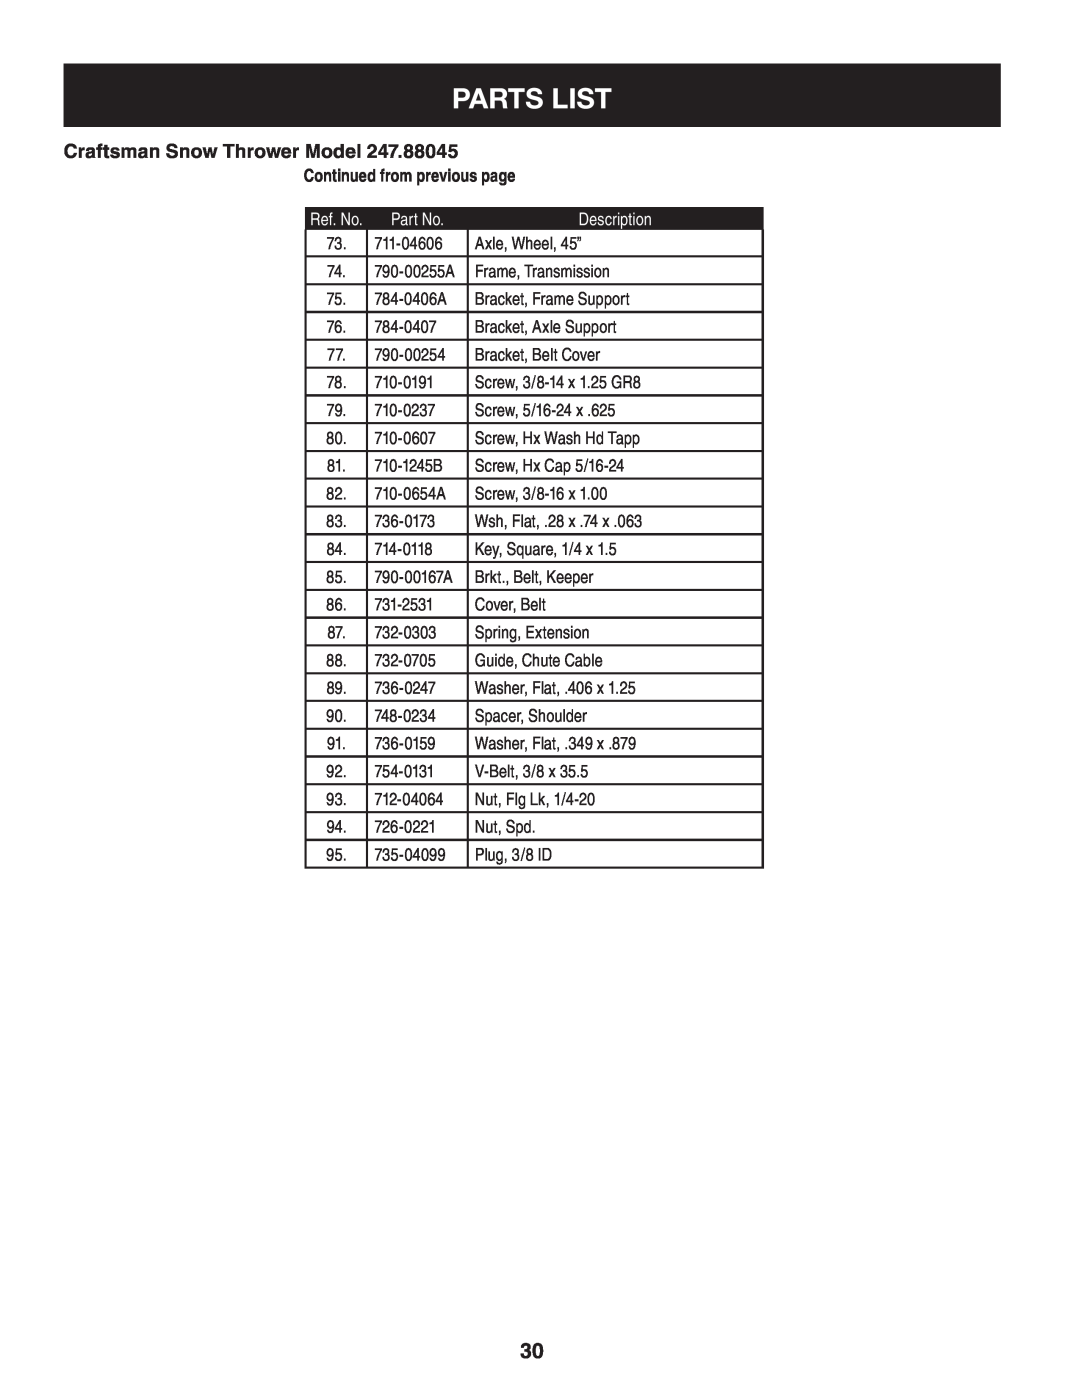 Craftsman 247.88045 manual Parts List, Craftsman Snow Thrower Model, Continued from previous page, Description 